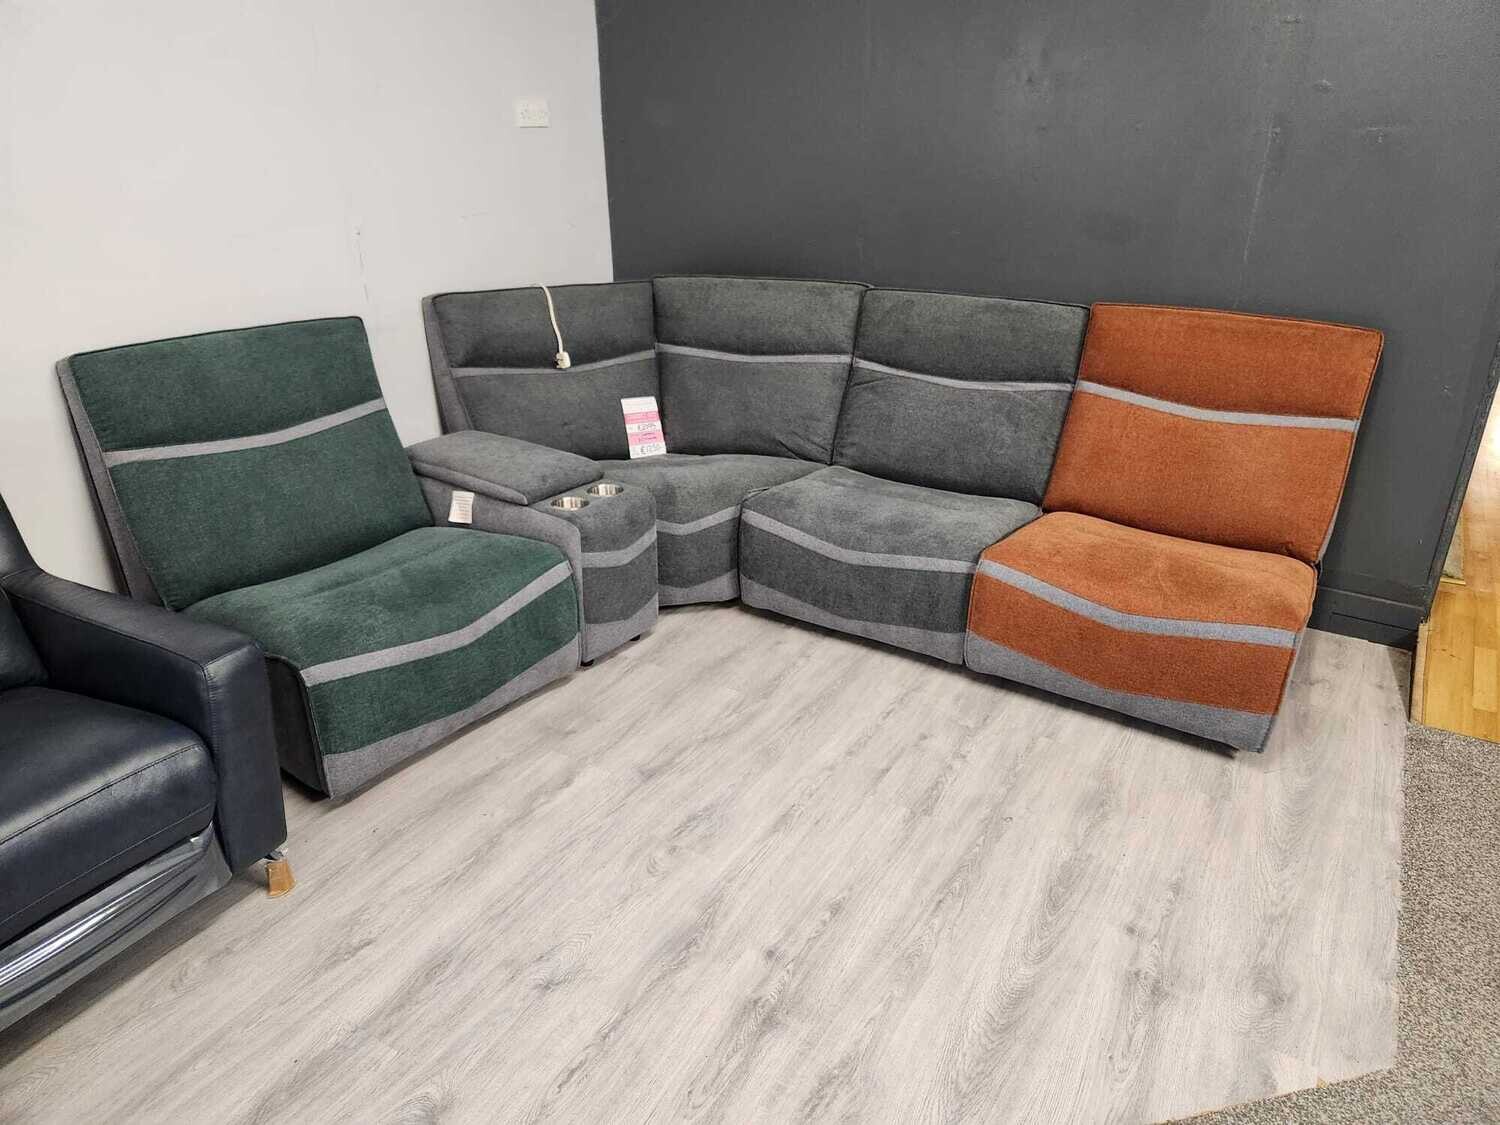 Etc. reclining Clearance/ Sofa - Couch/ CORNER UNIT